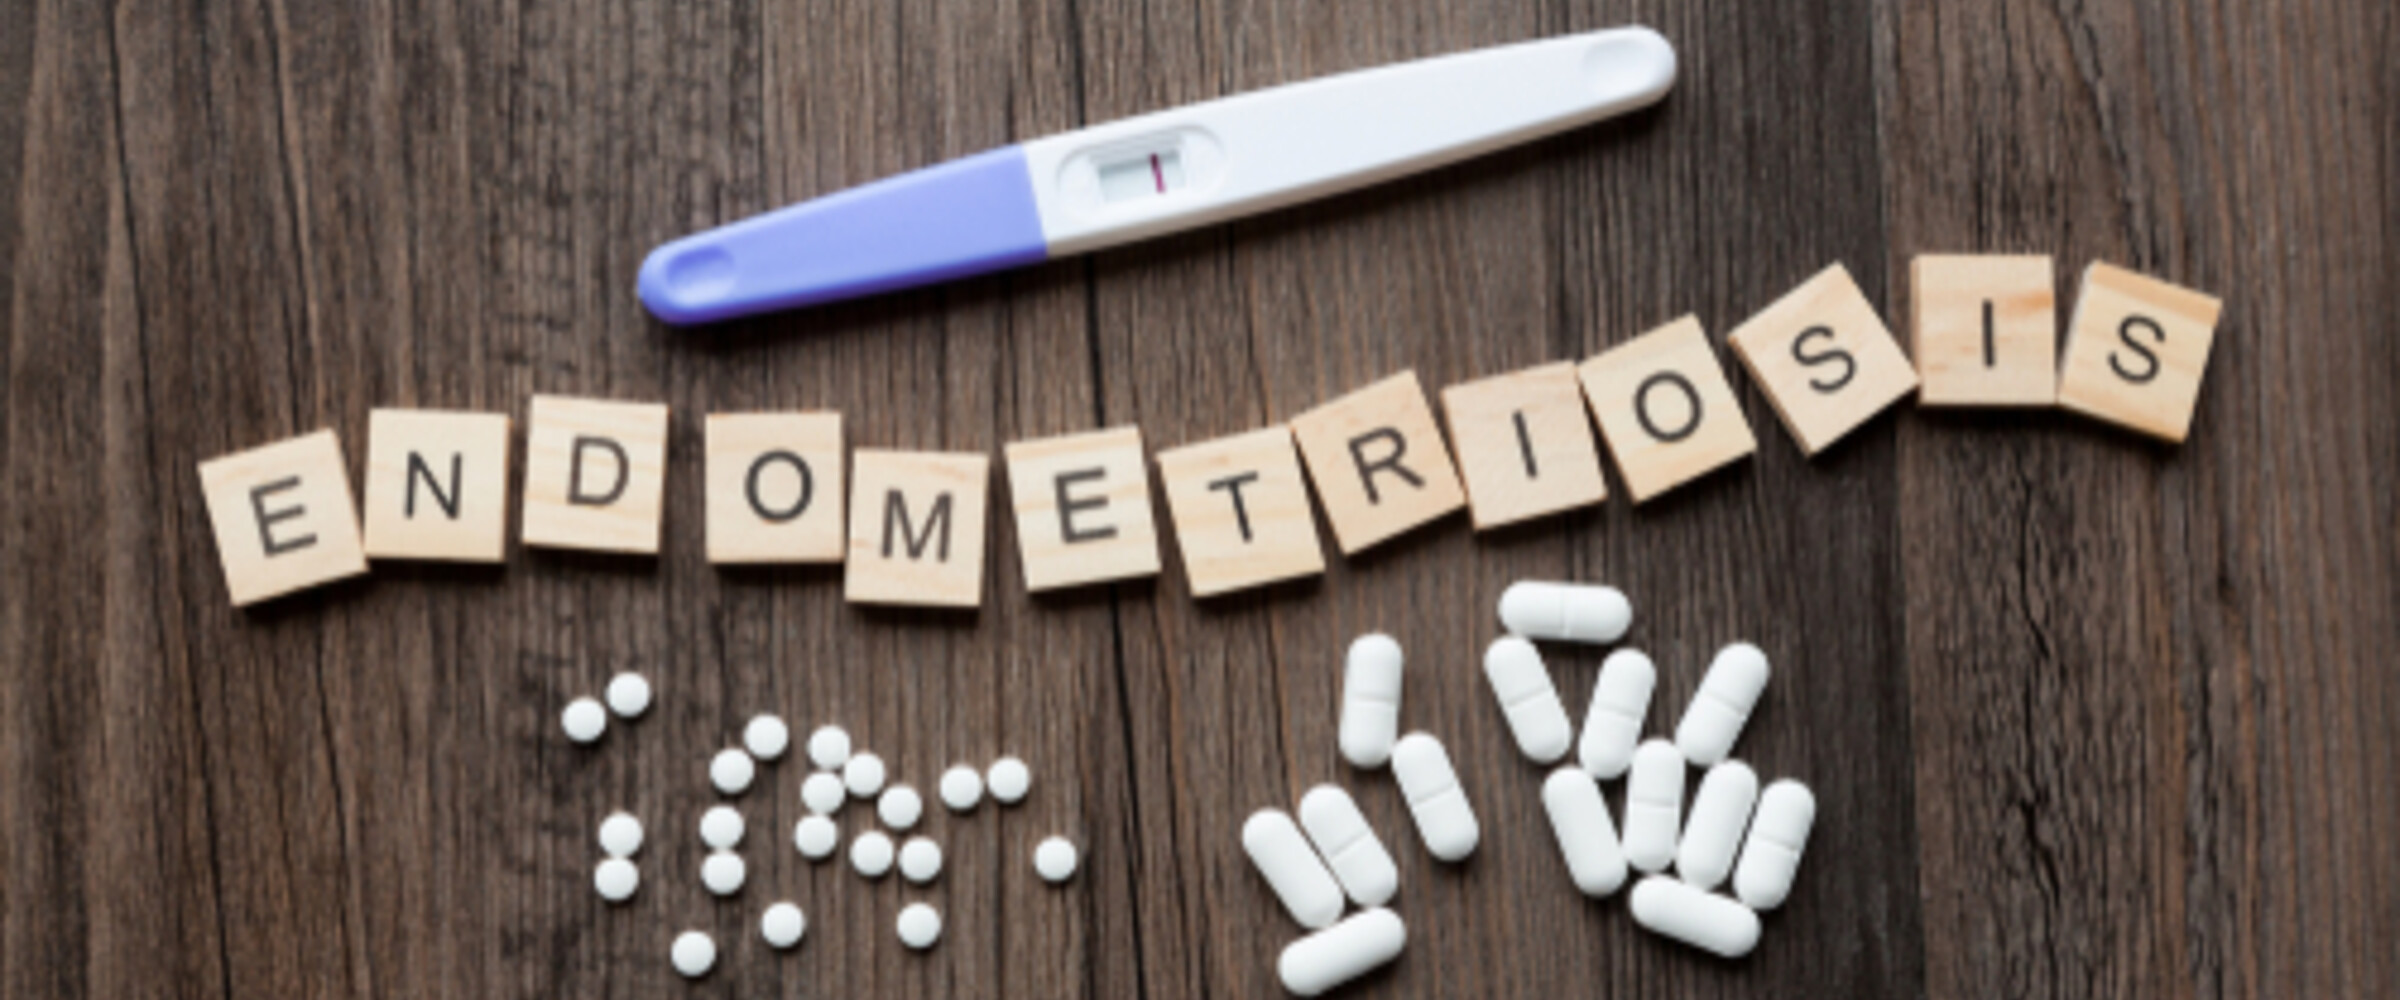 pregnancy test, pills and tiles spelling out endometriosis